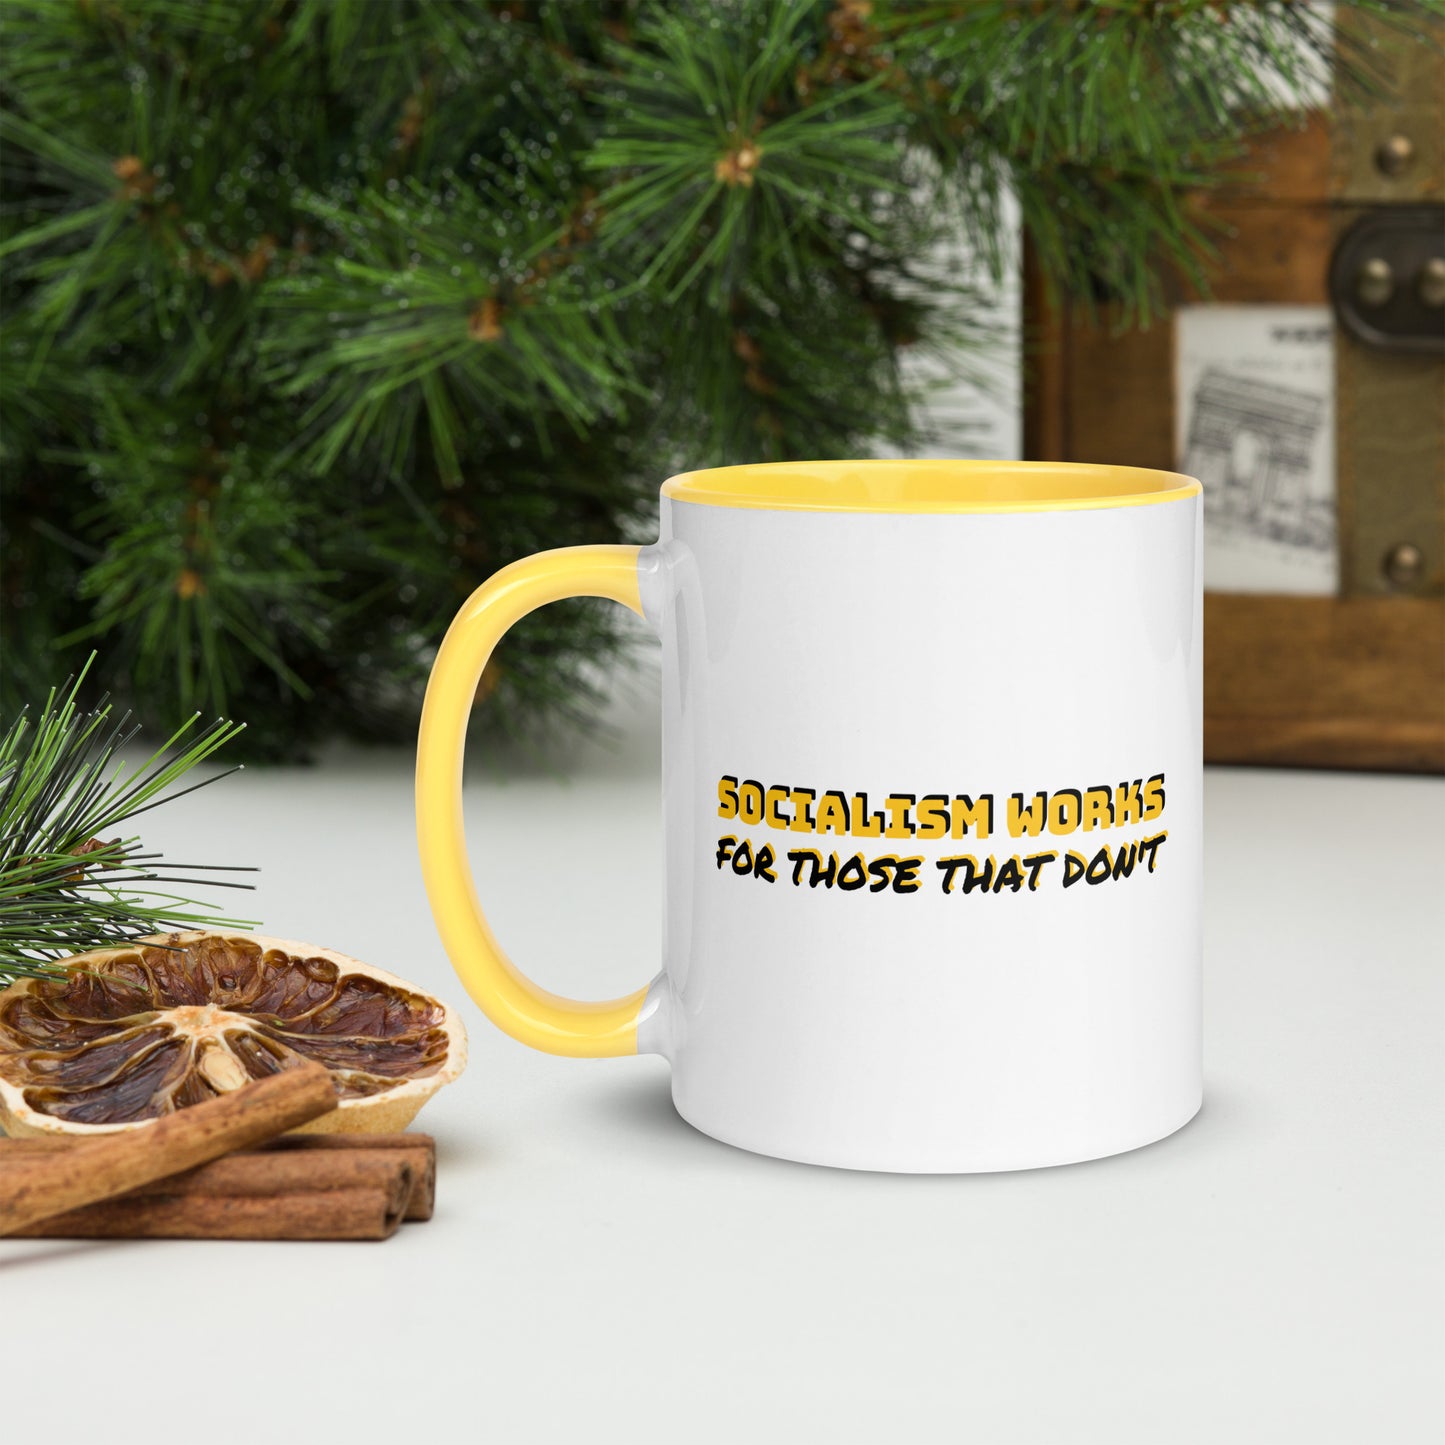 Yellow and Black Libertarian Anti-Socialist Coffee Mug - Socialism Works for Those That Don't